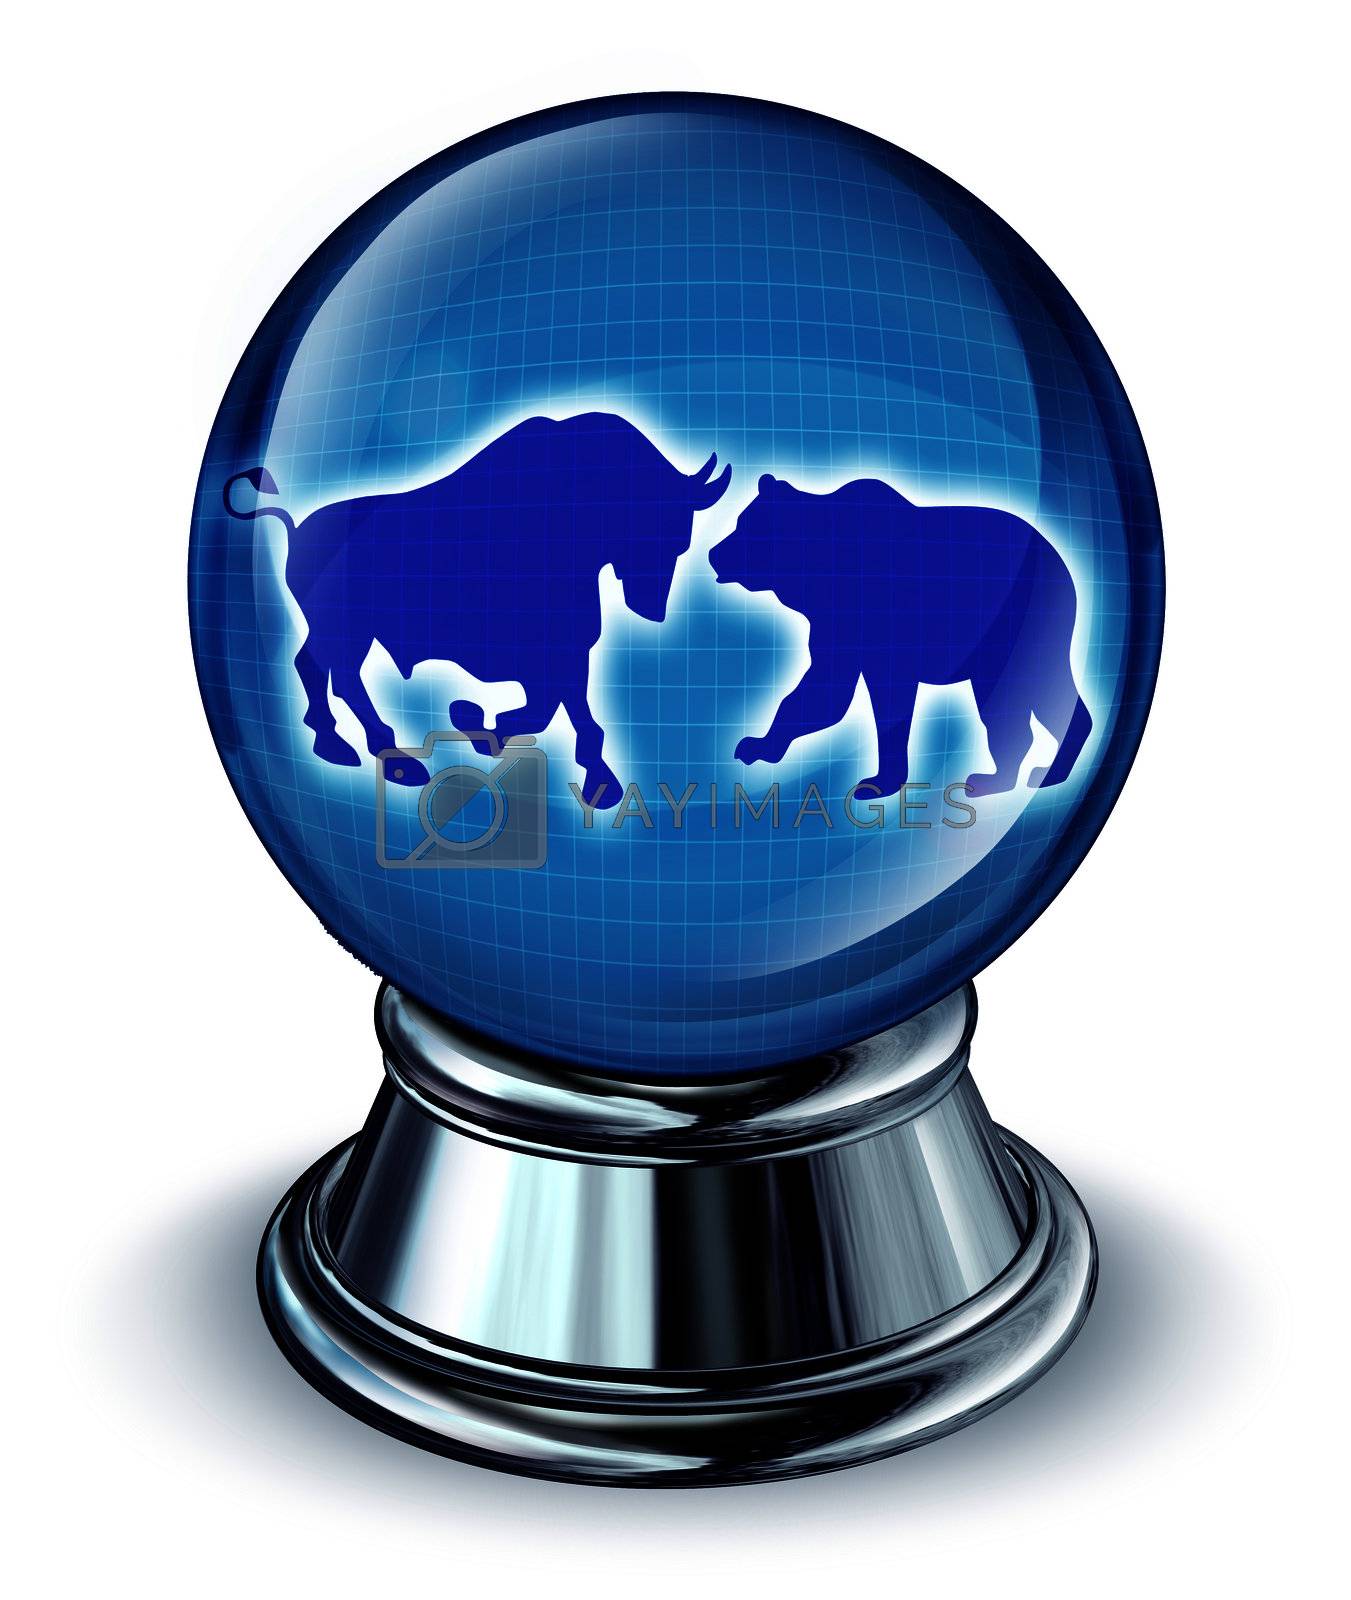 Royalty free image of Stock Market Predictions by brightsource